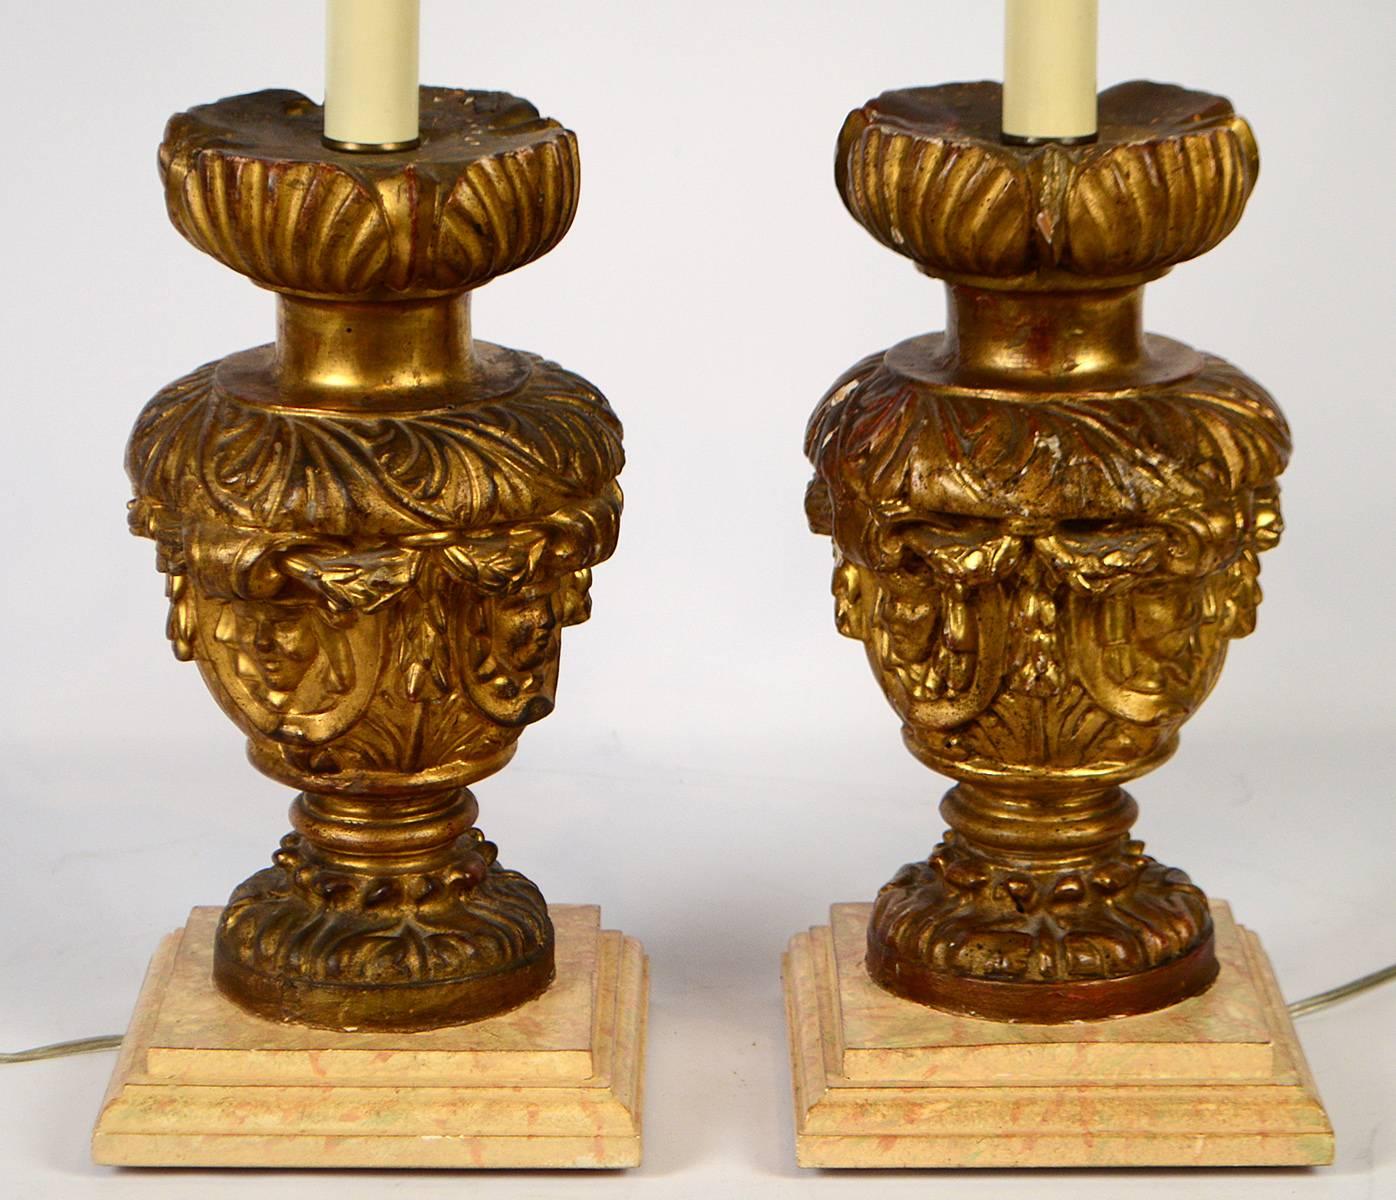 Pair of giltwood lamps. Italian carved wood, 18th-19th century. Faux bases. Good condition based on age.